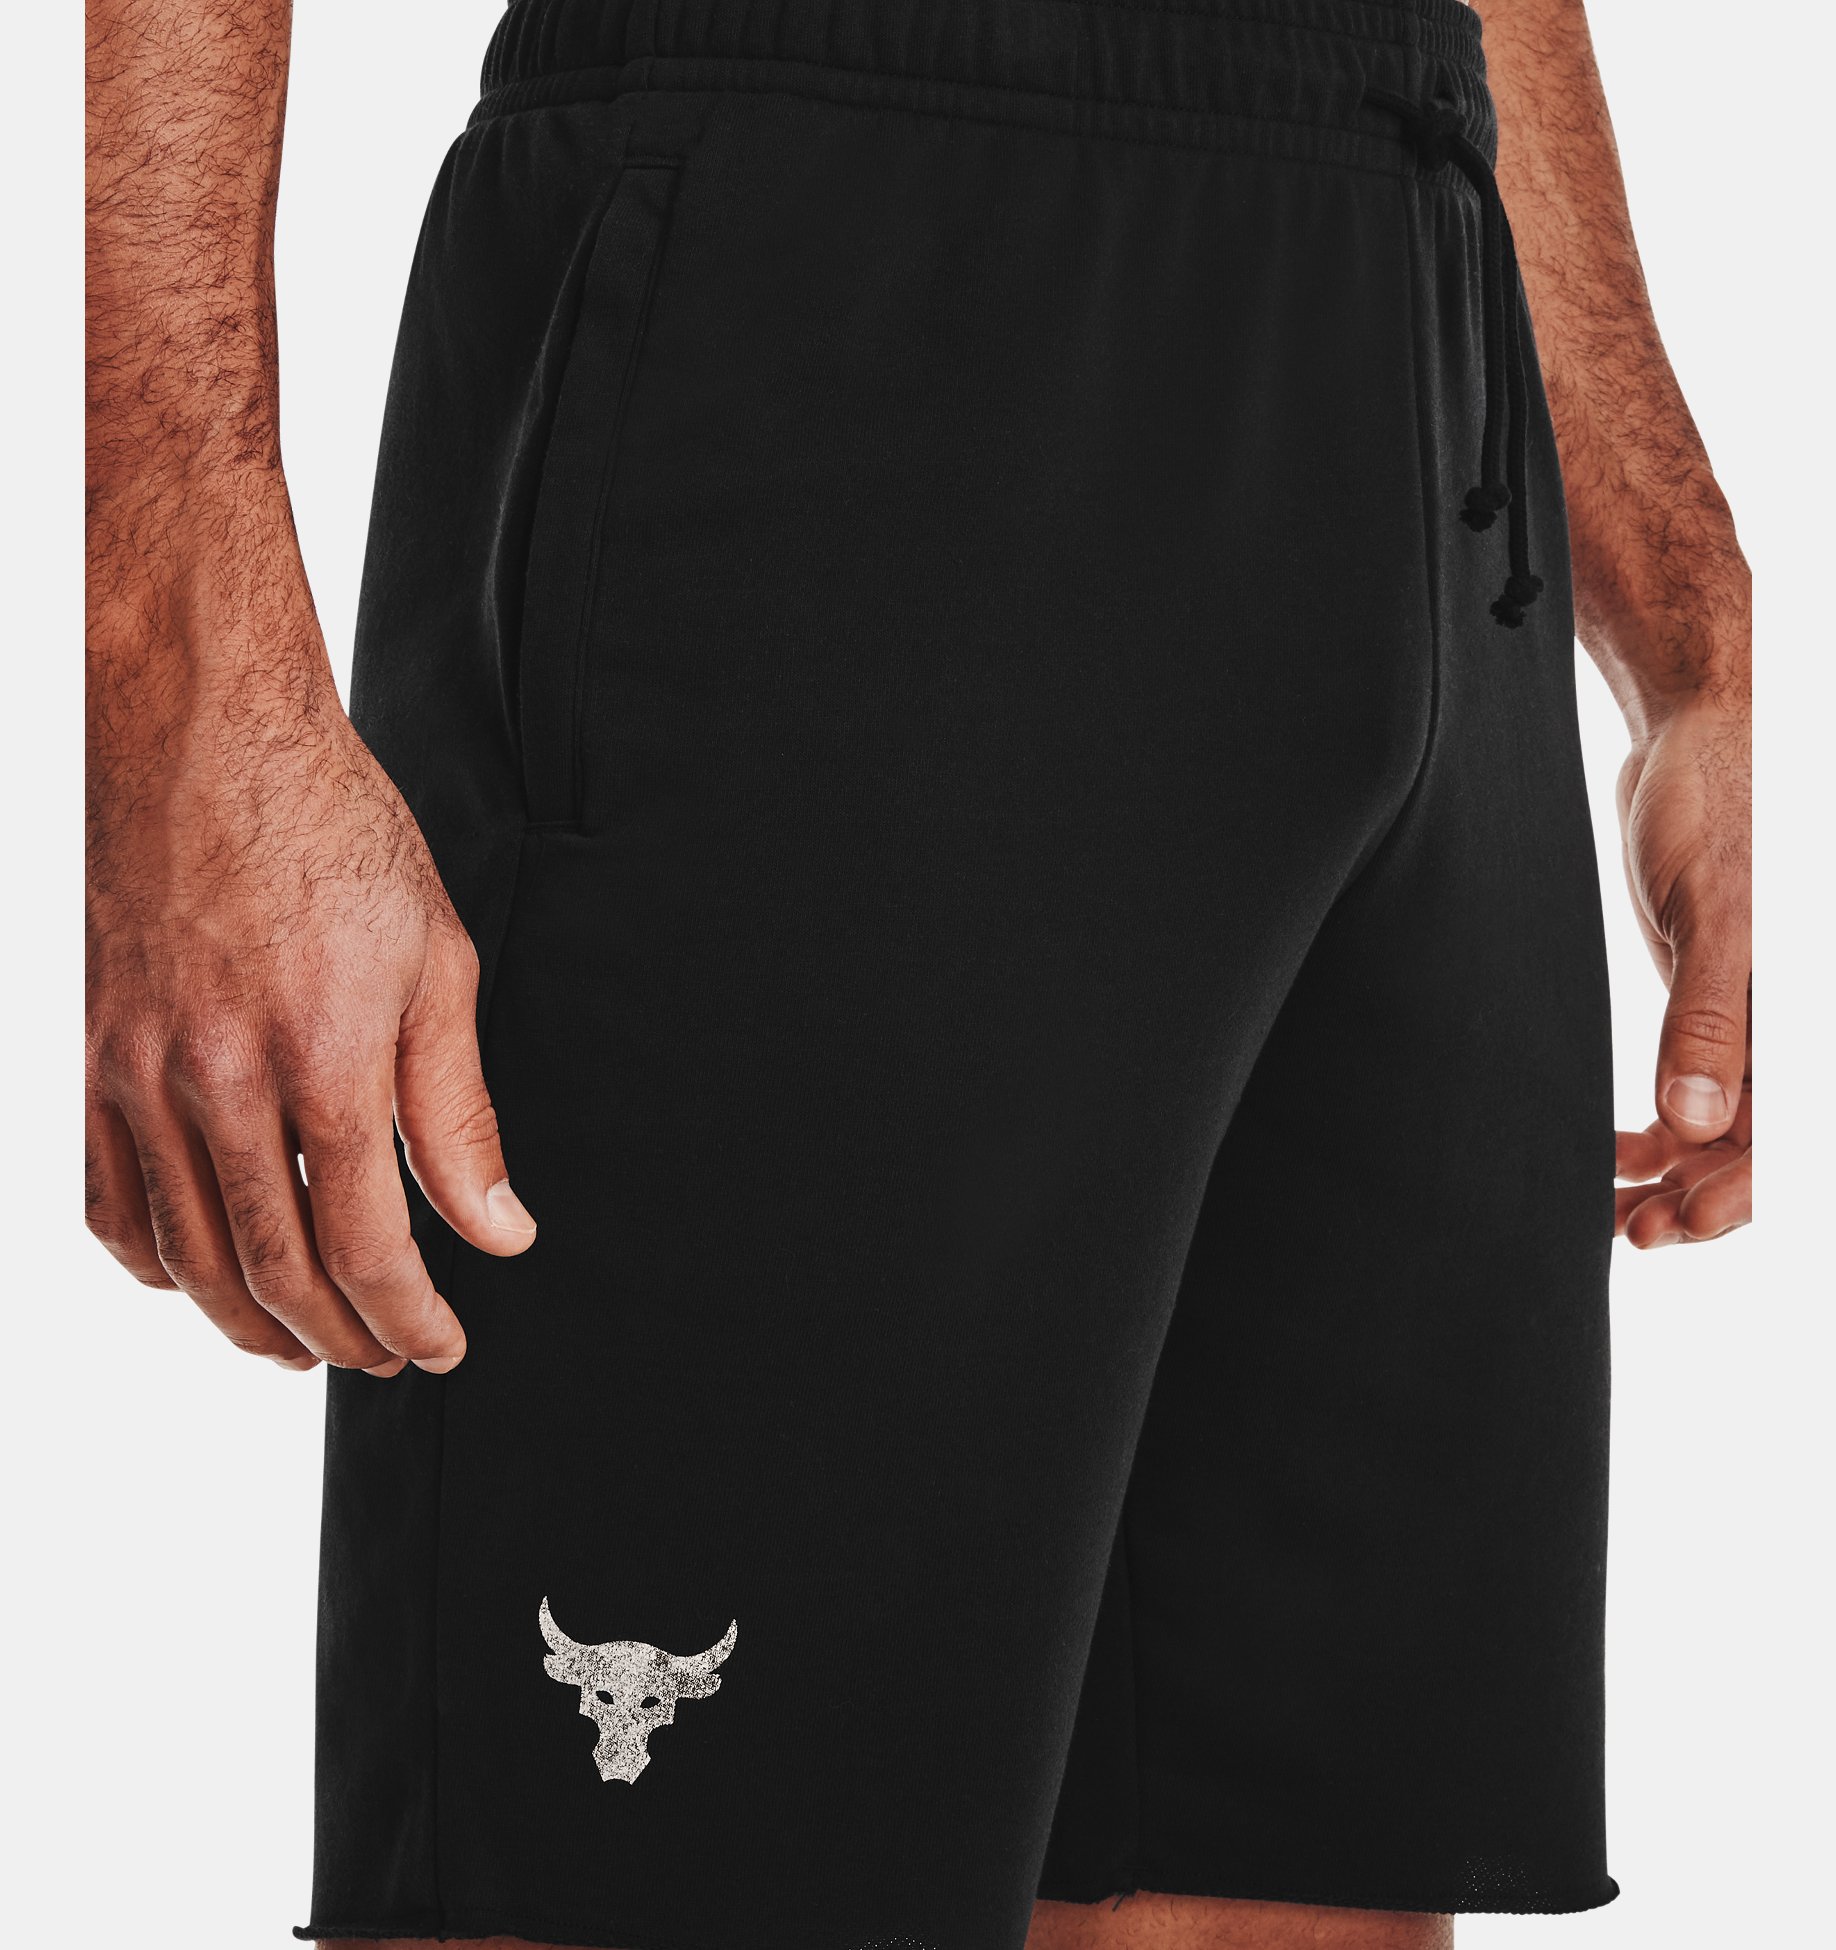 under armour men's project rock loose fit training gym shorts storm black small 